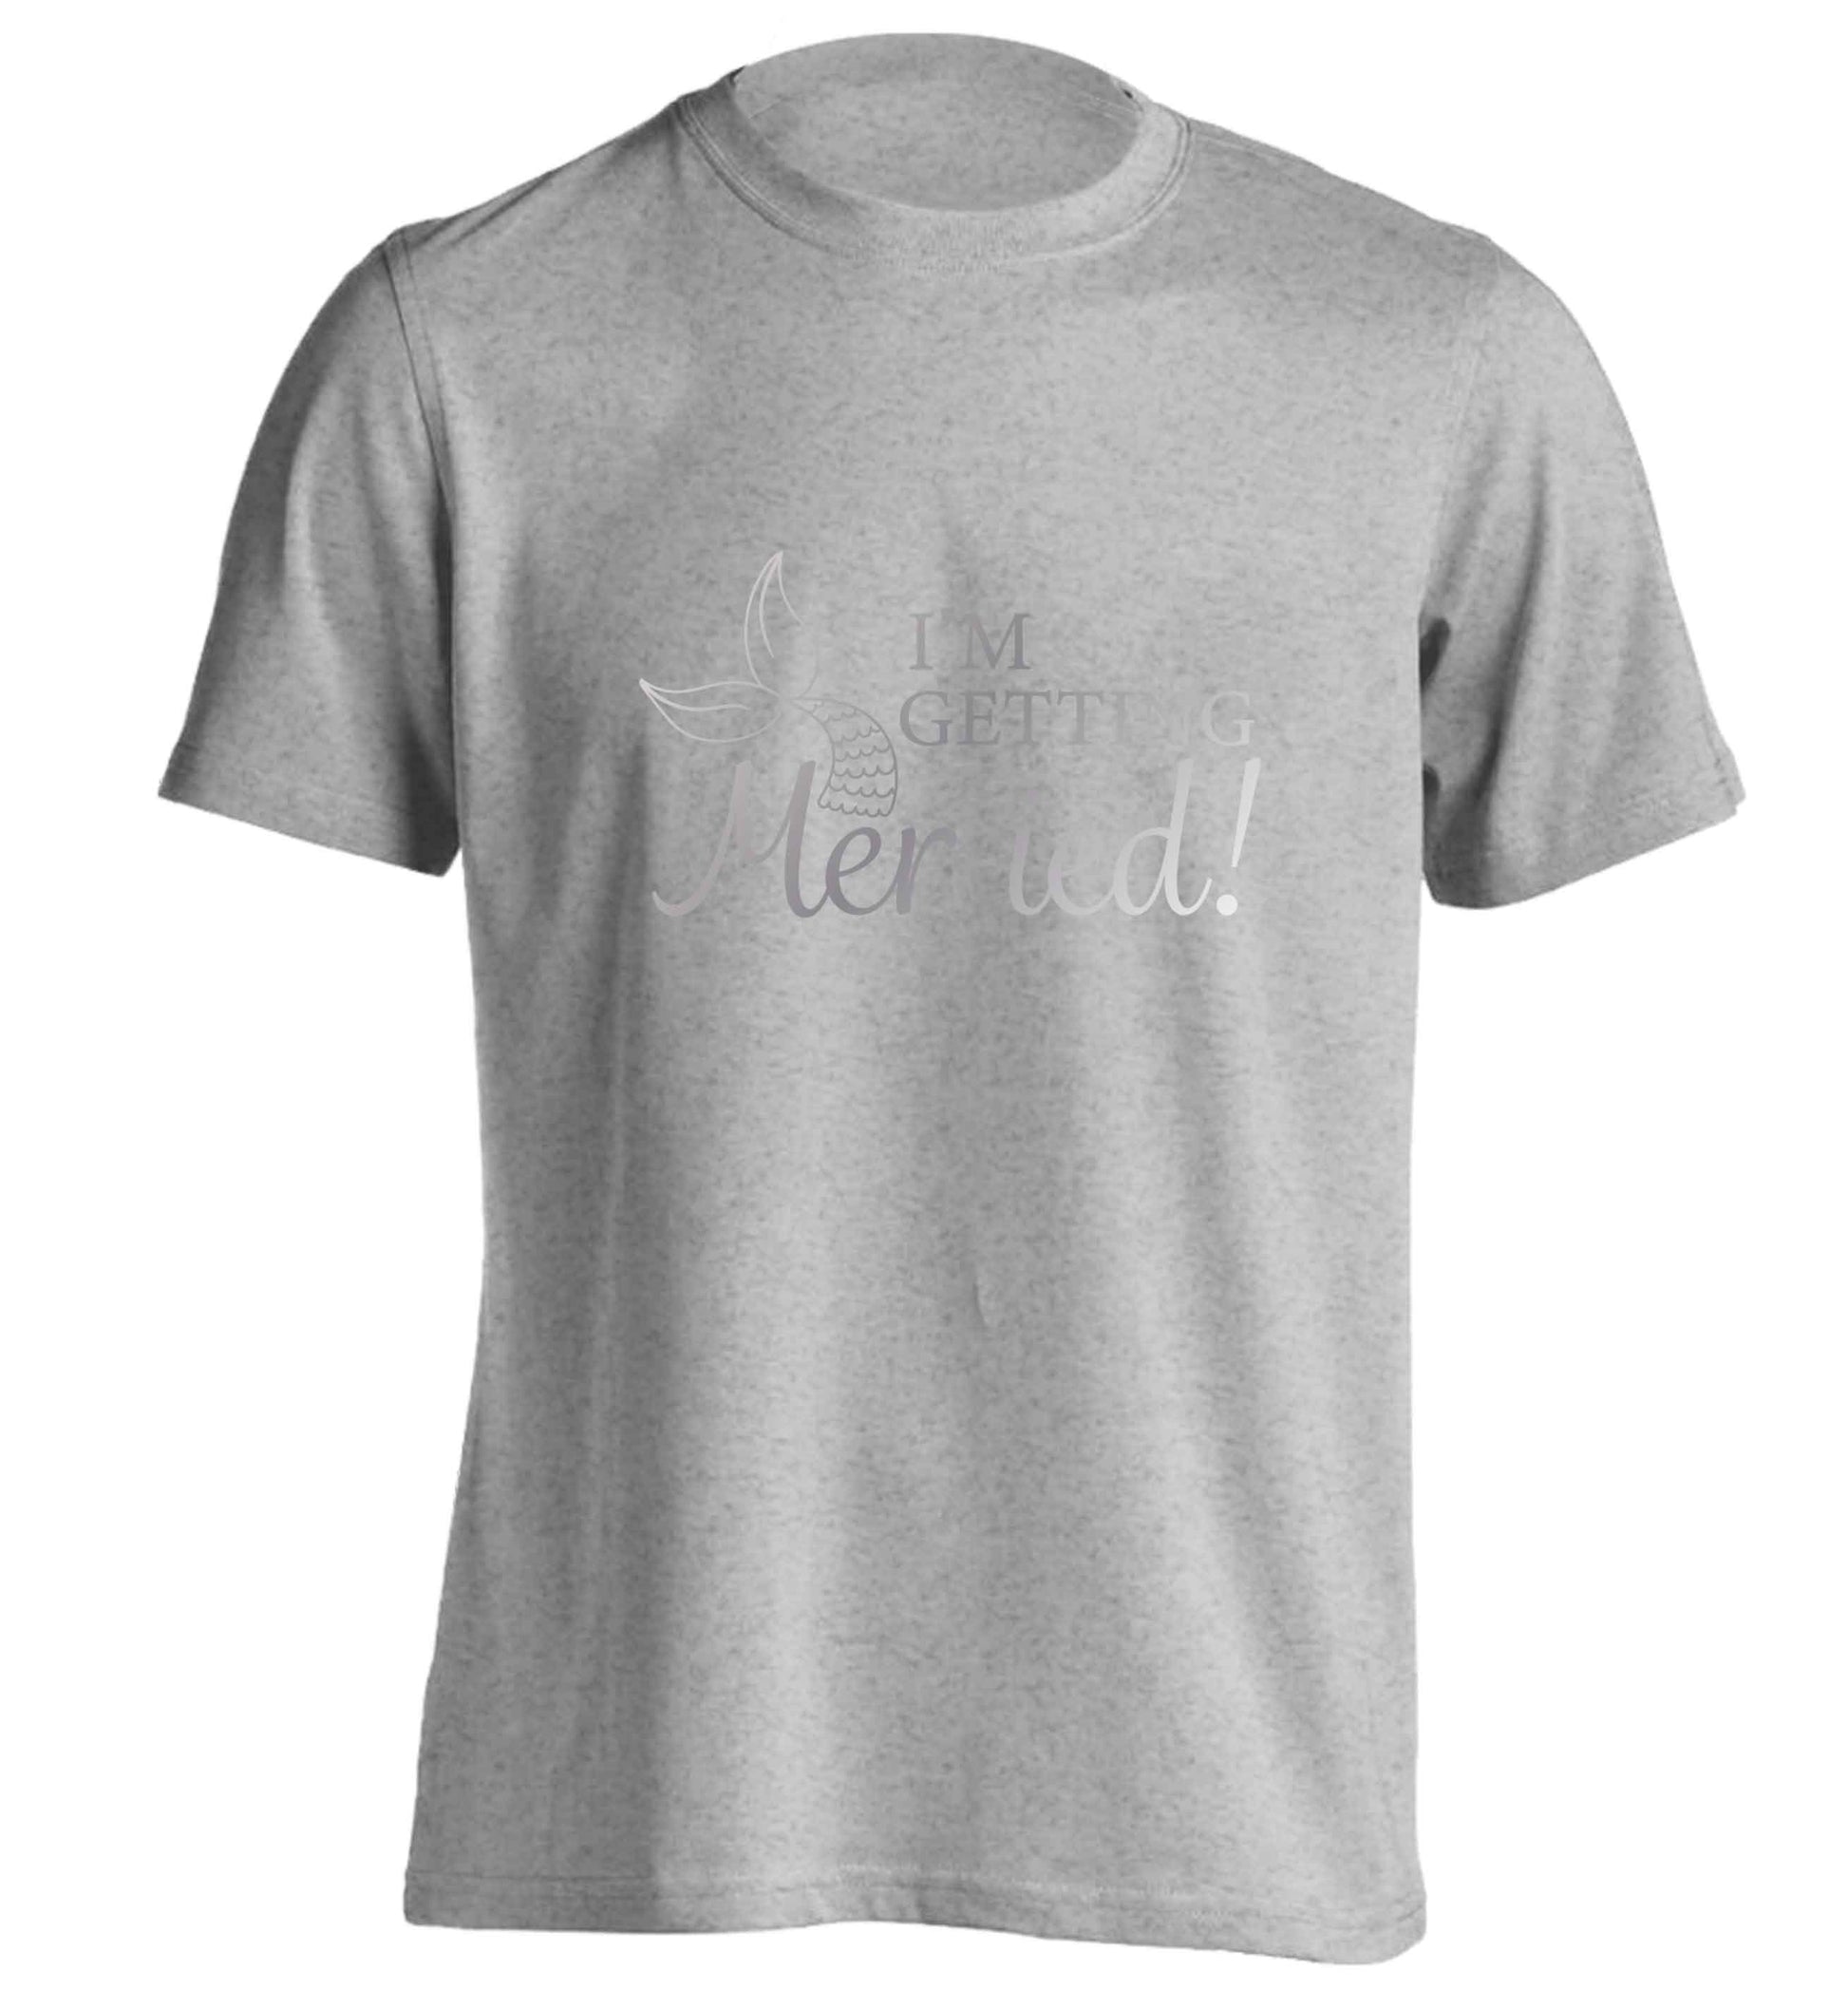 Personalised wedding thank you's Mr and Mrs wedding and date! Ideal wedding favours! adults unisex grey Tshirt 2XL